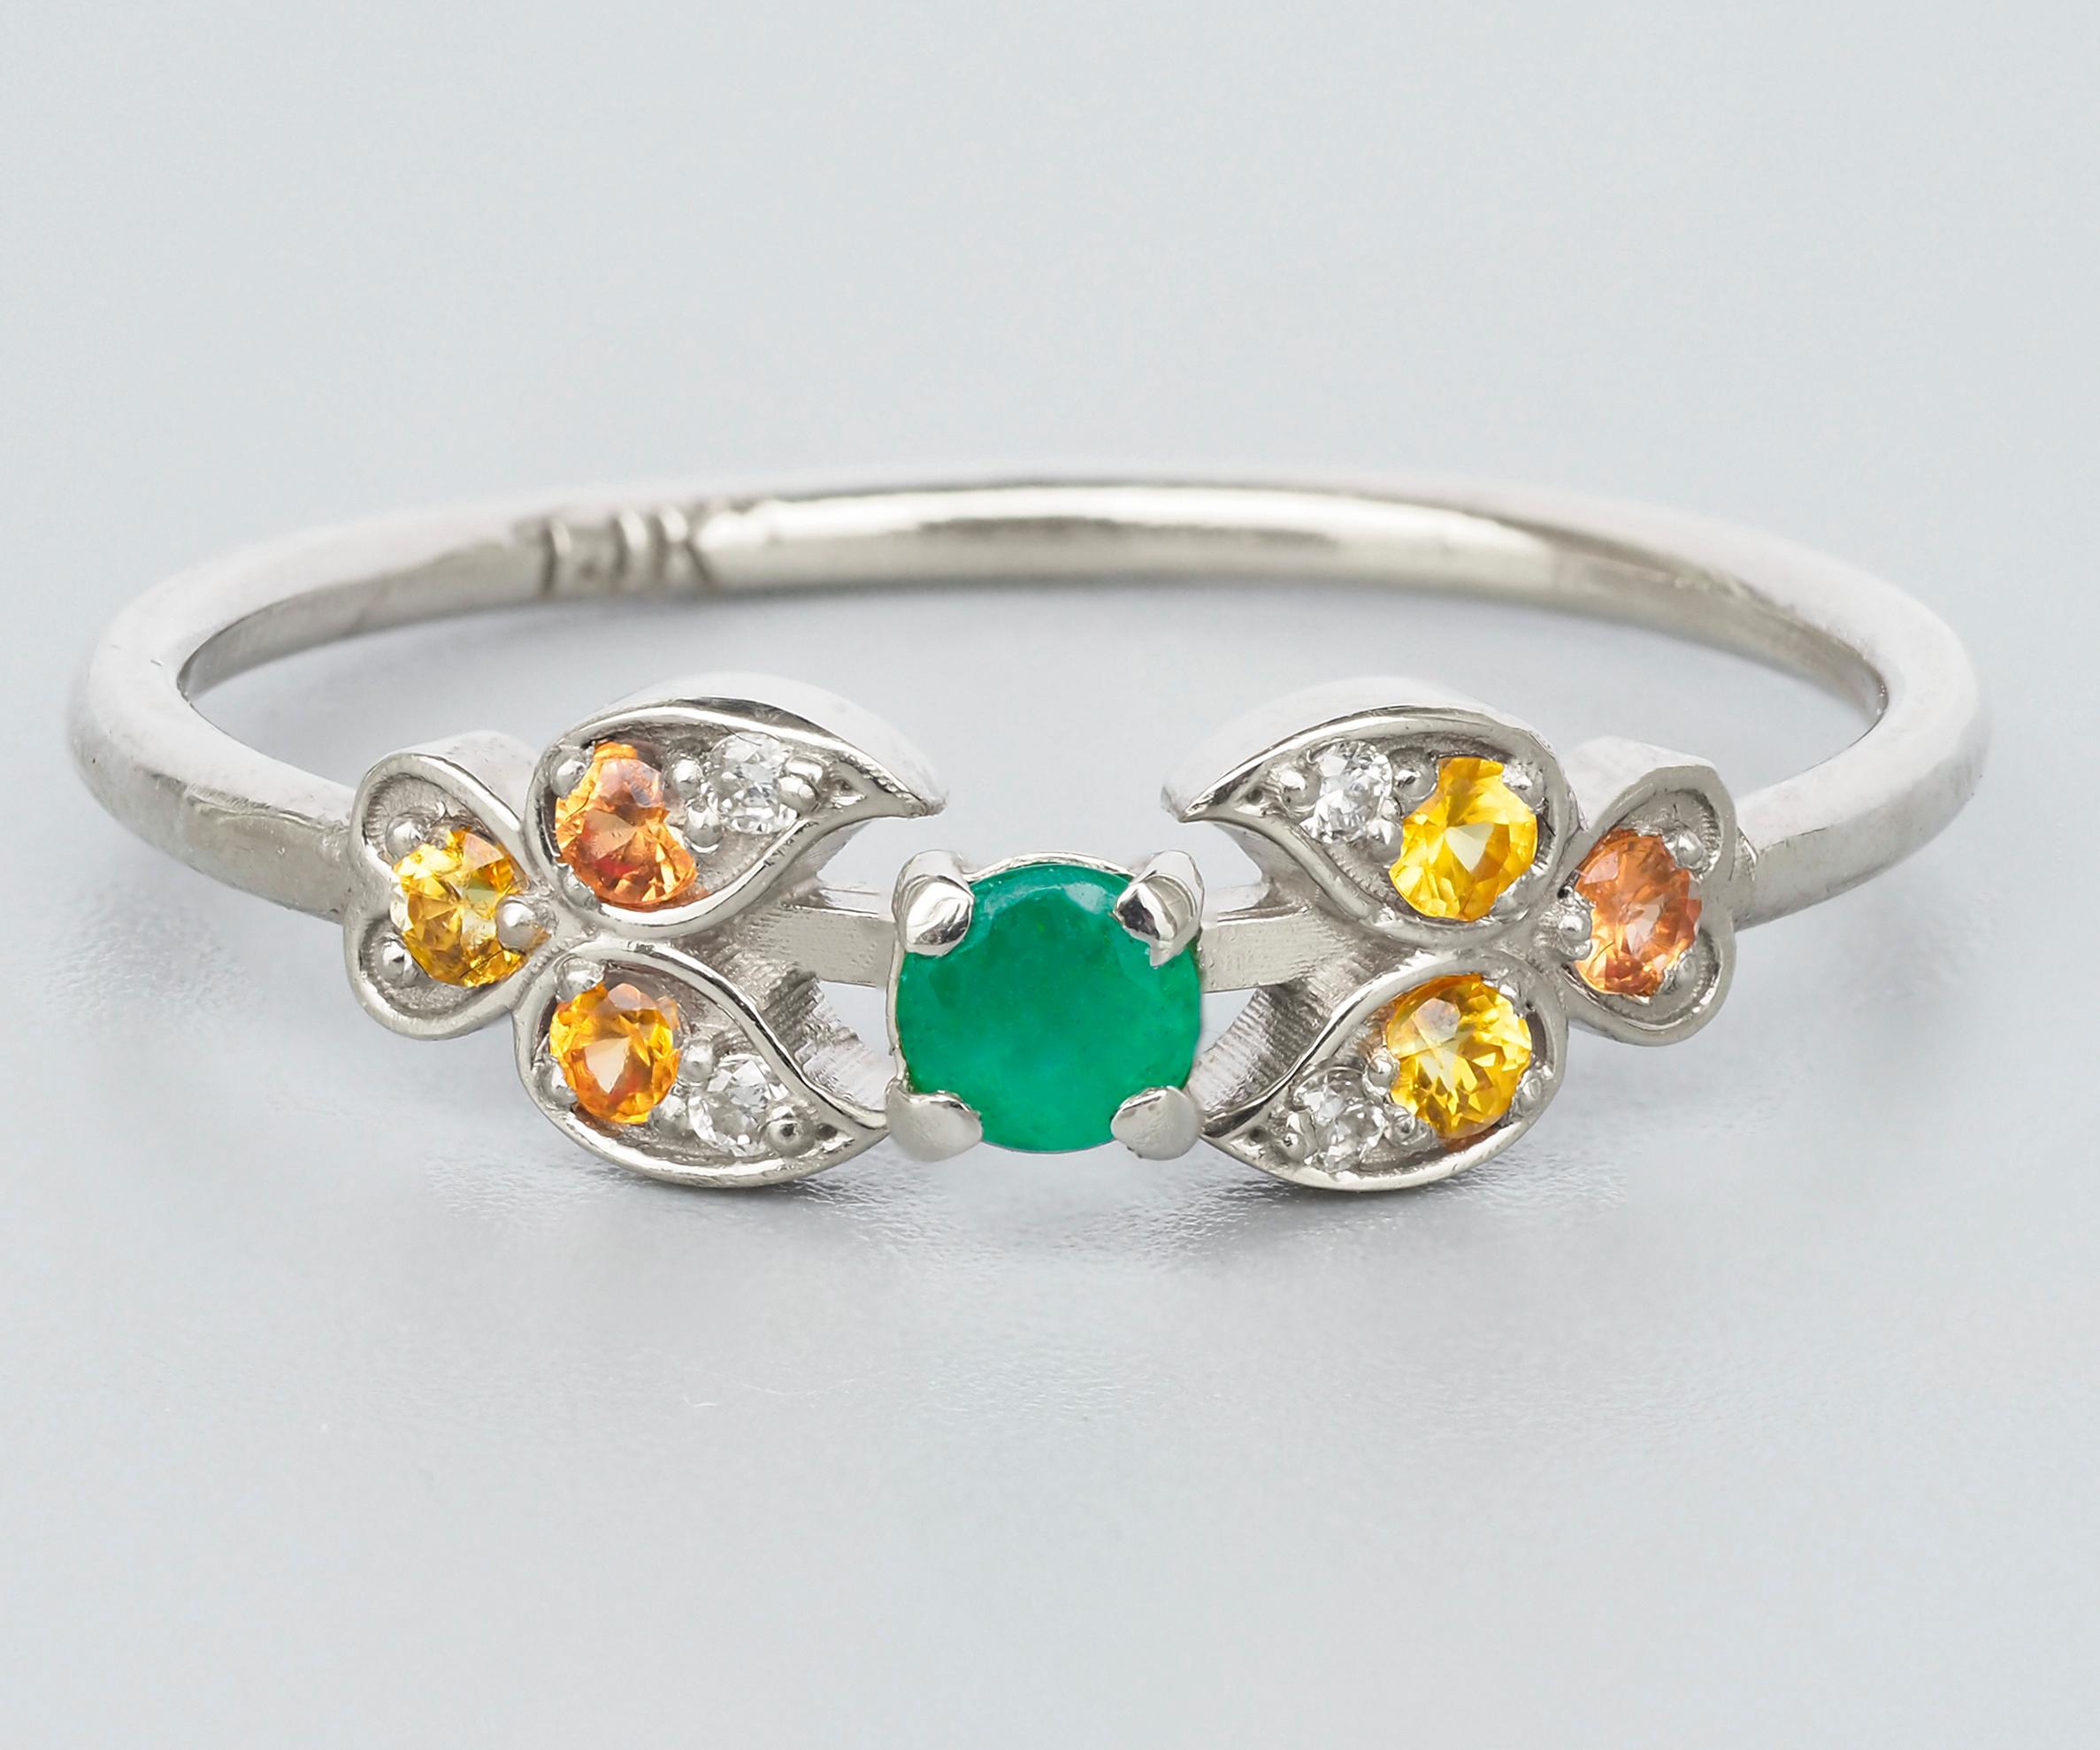 For Sale:  Emerald, Diamonds and Sapphires ring in 14k gold. Tiny ring 2